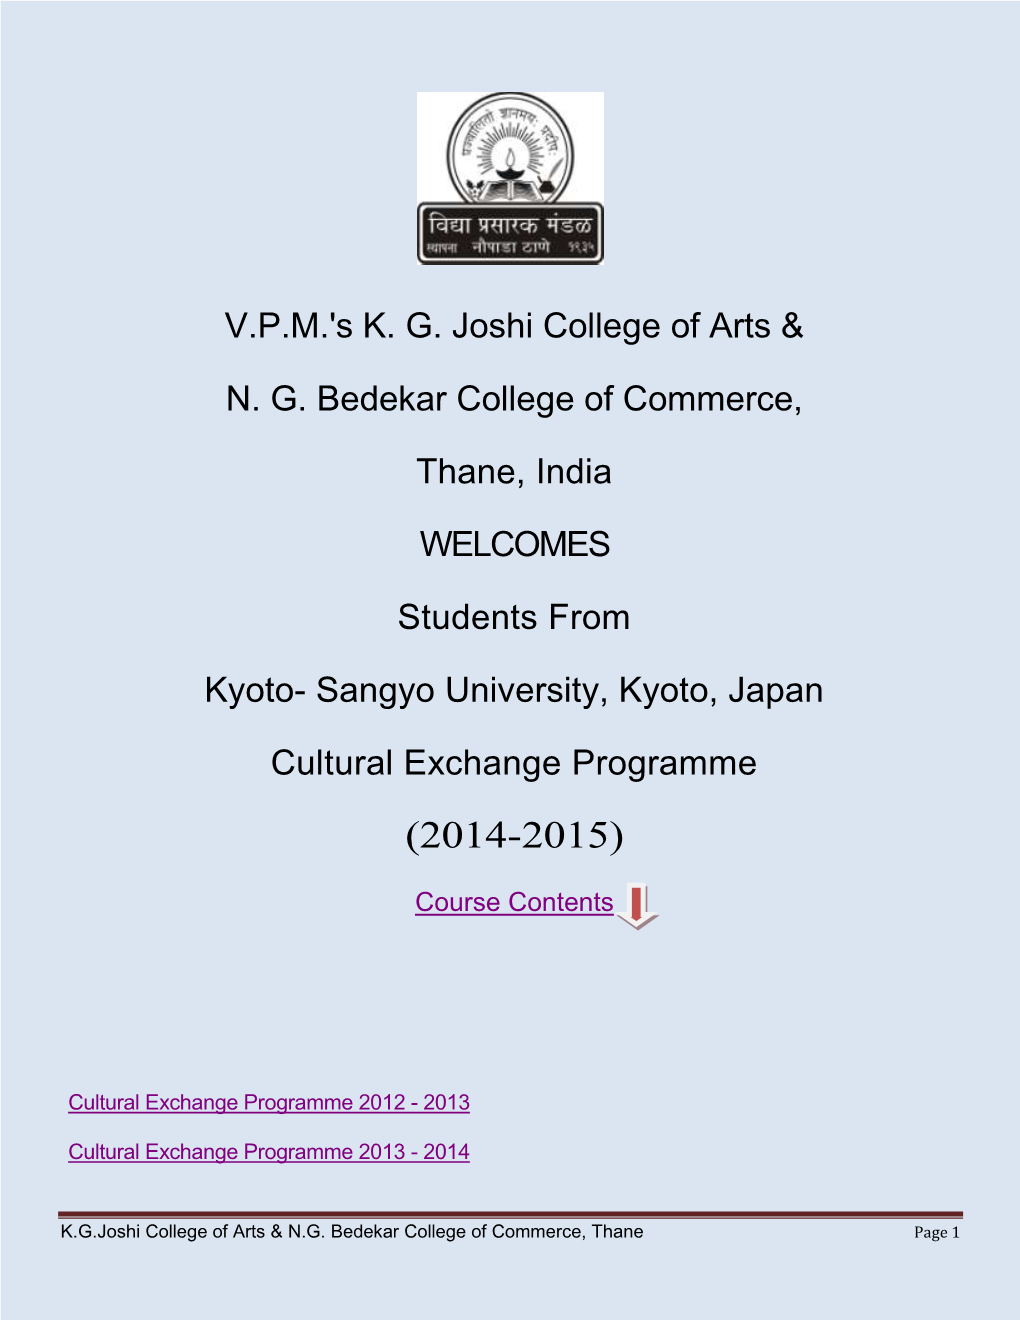 V.P.M.'S K. G. Joshi College of Arts & N. G. Bedekar College Of